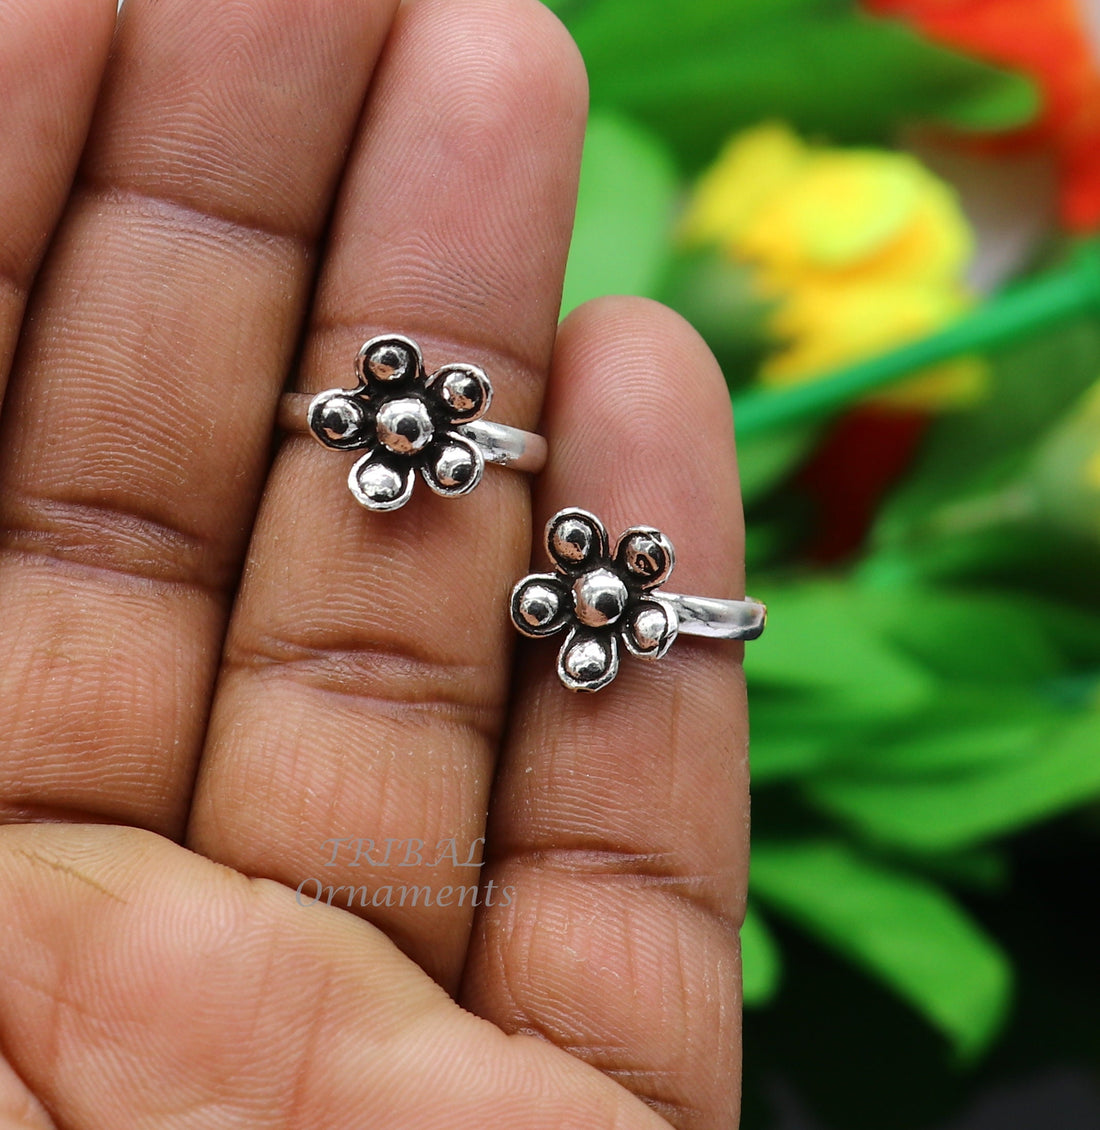 925 sterling silver amazing flower design handmade toe ring, toe band stylish modern women's brides jewelry, india traditional jewelry ytr48 - TRIBAL ORNAMENTS